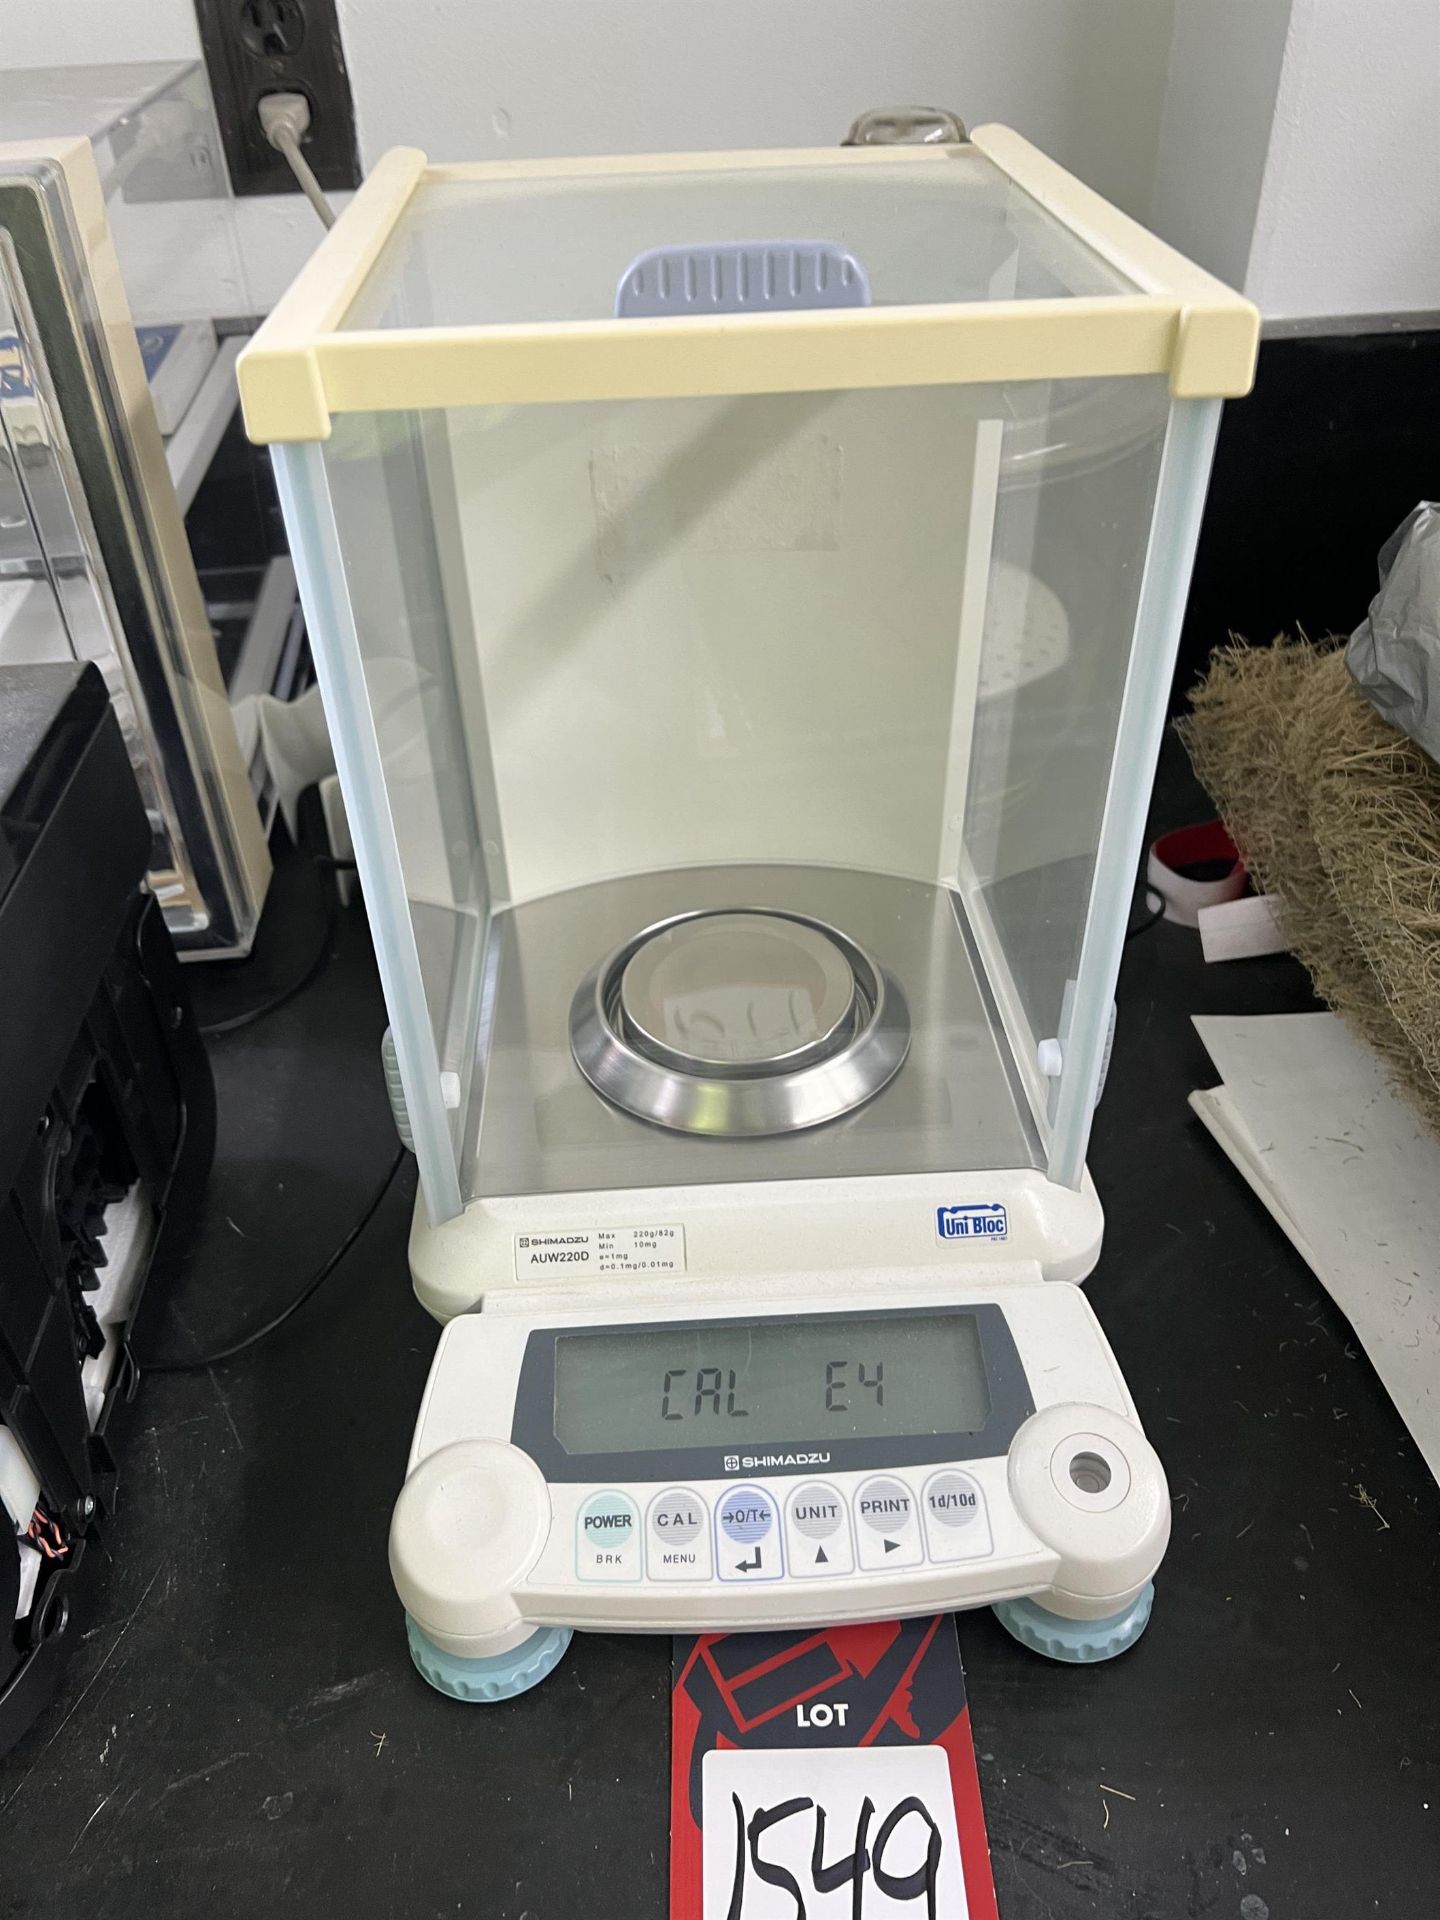 SHIMADZU AUW220D Lab Scale, s/n D450001179 - Image 2 of 4